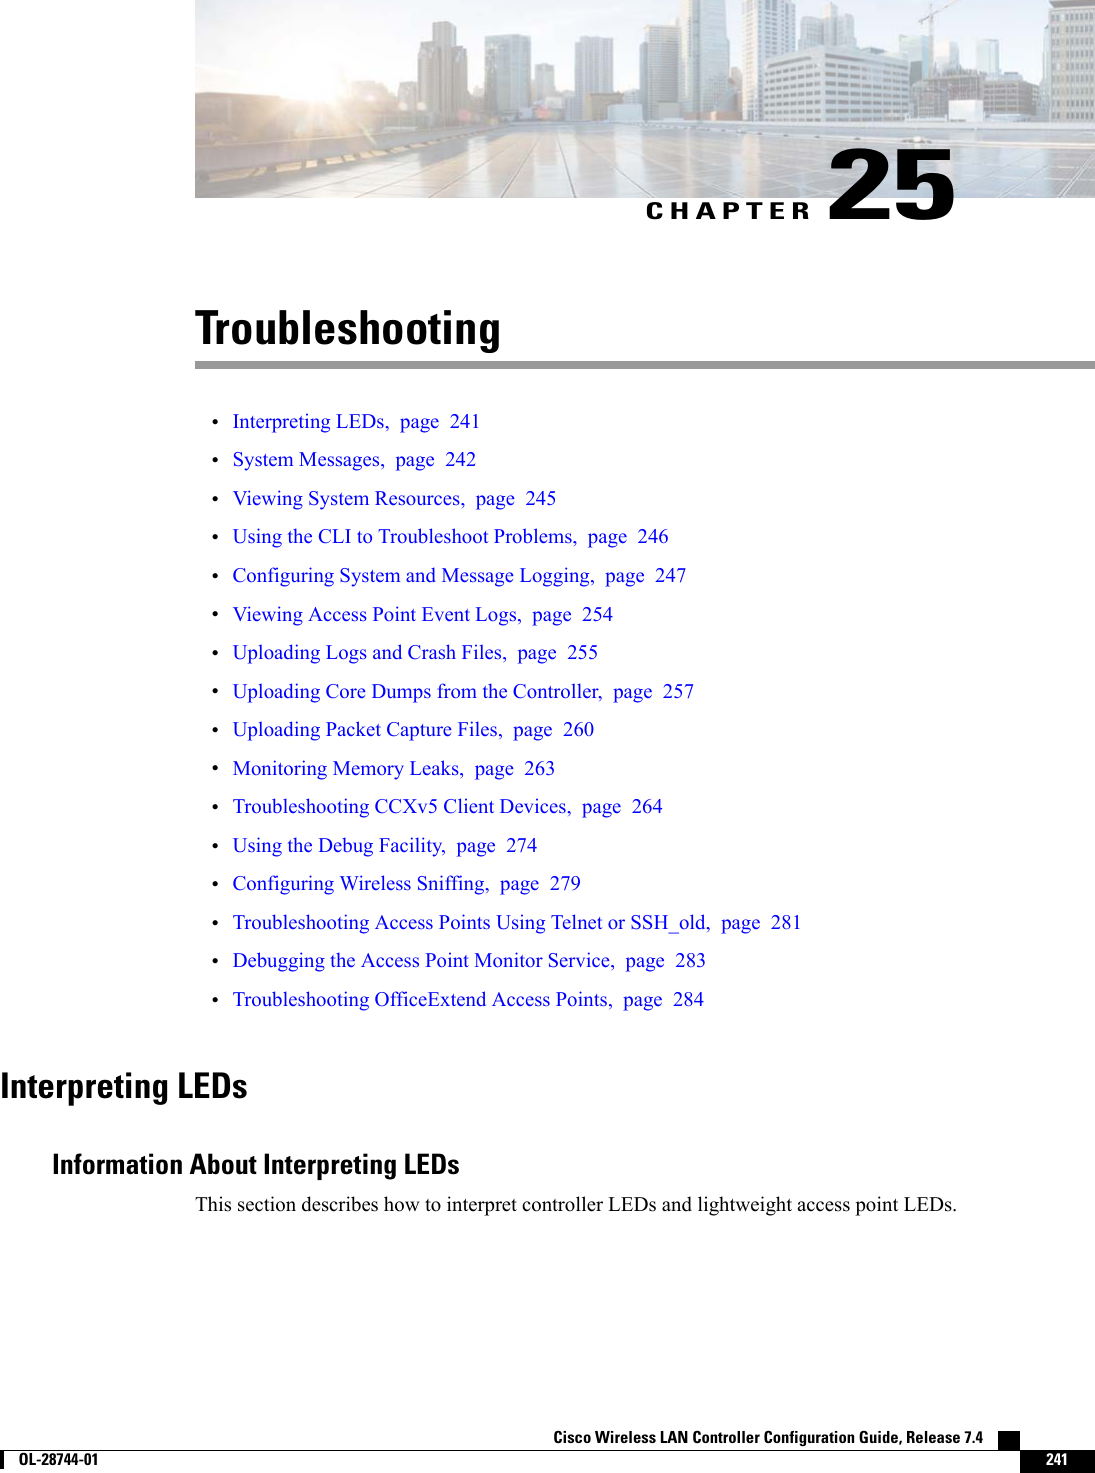 CHAPTER 25Troubleshooting•Interpreting LEDs, page 241•System Messages, page 242•Viewing System Resources, page 245•Using the CLI to Troubleshoot Problems, page 246•Configuring System and Message Logging, page 247•Viewing Access Point Event Logs, page 254•Uploading Logs and Crash Files, page 255•Uploading Core Dumps from the Controller, page 257•Uploading Packet Capture Files, page 260•Monitoring Memory Leaks, page 263•Troubleshooting CCXv5 Client Devices, page 264•Using the Debug Facility, page 274•Configuring Wireless Sniffing, page 279•Troubleshooting Access Points Using Telnet or SSH_old, page 281•Debugging the Access Point Monitor Service, page 283•Troubleshooting OfficeExtend Access Points, page 284Interpreting LEDsInformation About Interpreting LEDsThis section describes how to interpret controller LEDs and lightweight access point LEDs.Cisco Wireless LAN Controller Configuration Guide, Release 7.4        OL-28744-01 241